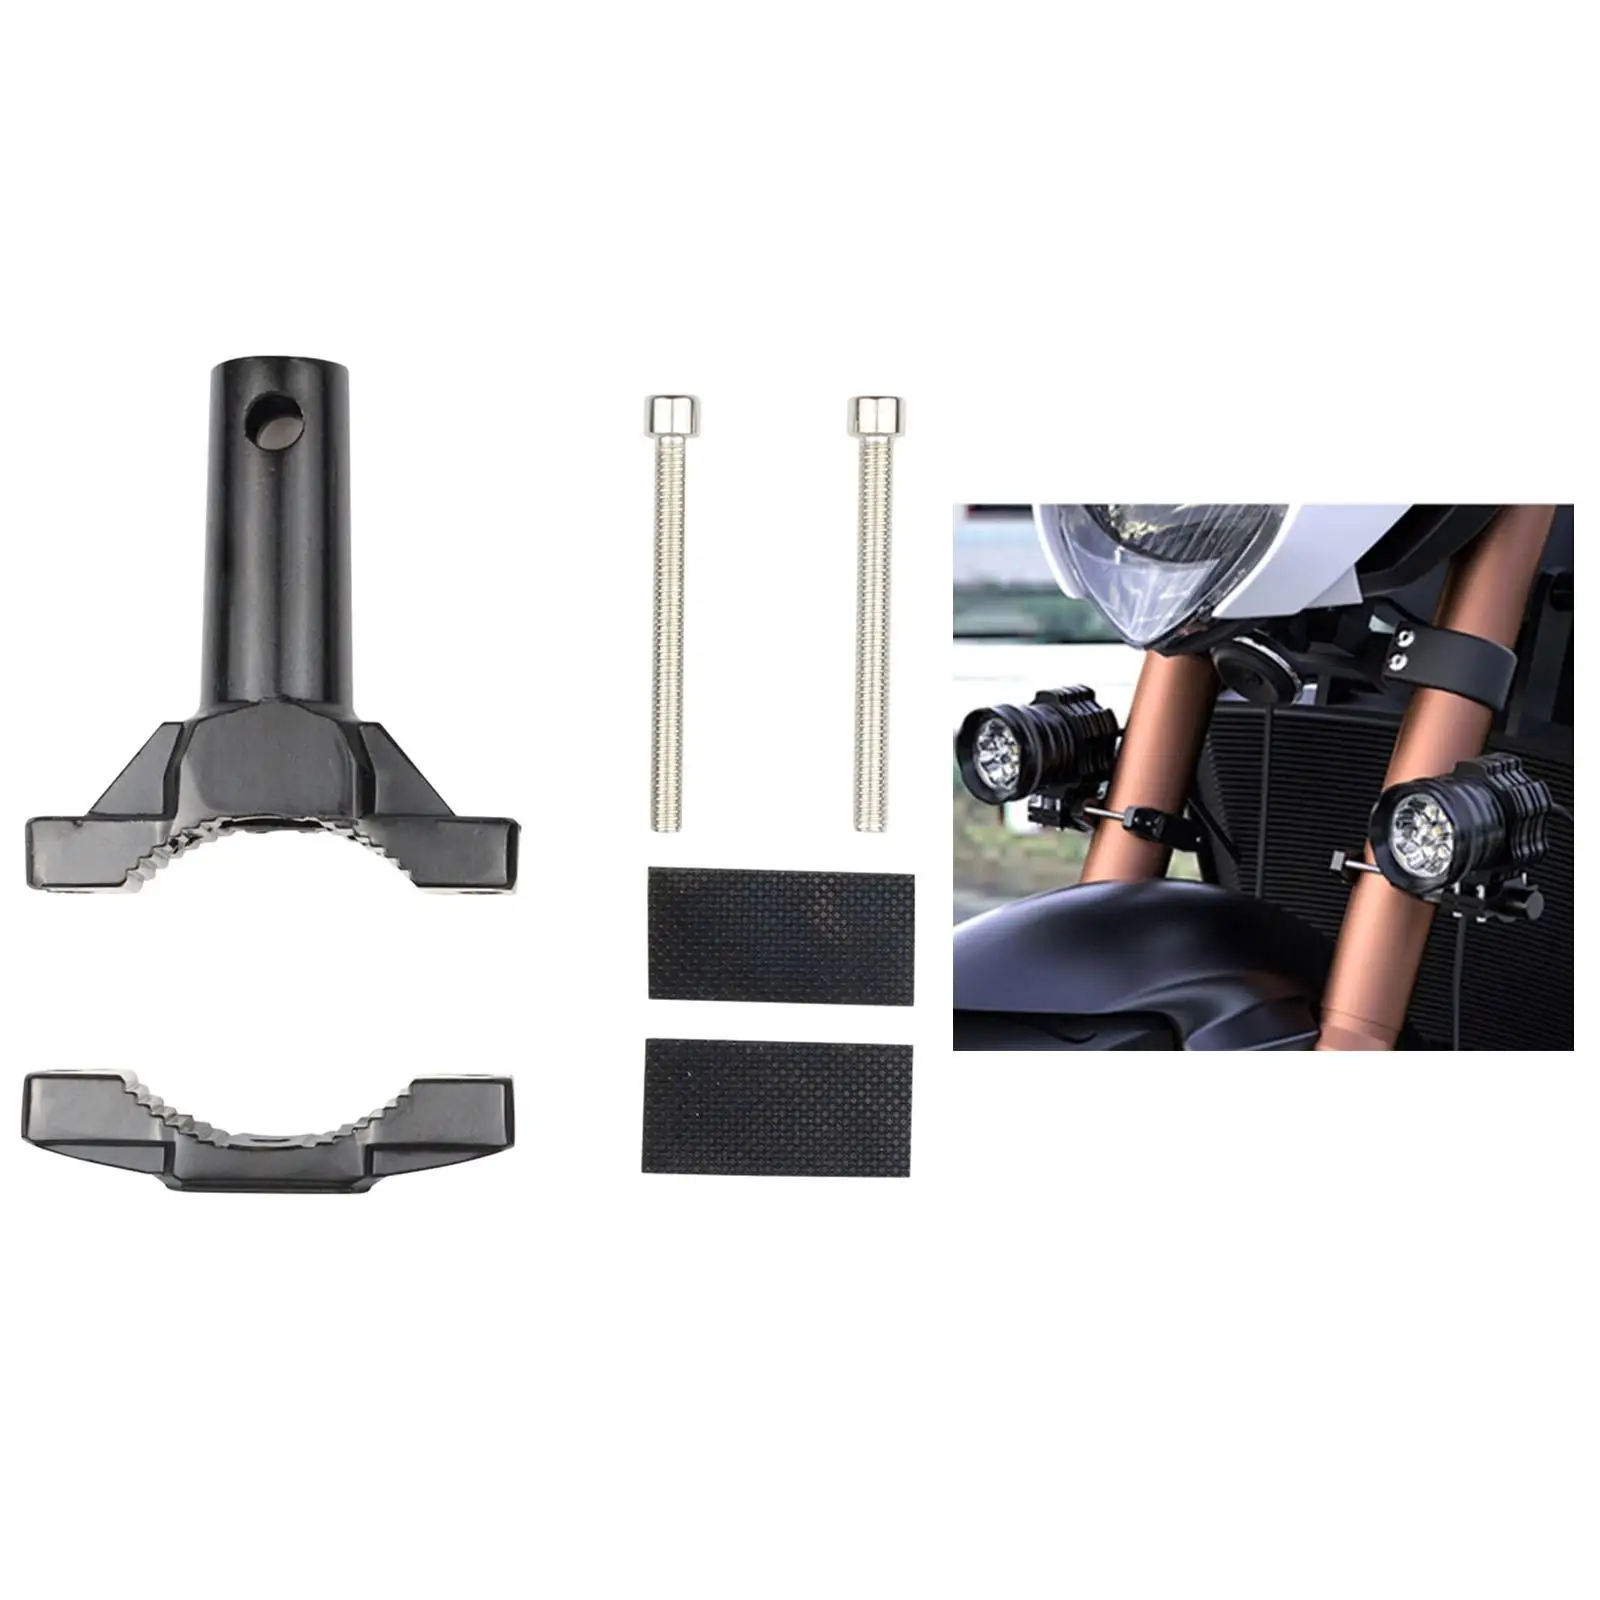 Mount Bracket Clamp for Motorcycle Bumper Motorbikes Fits 20-55mm Fork Tube